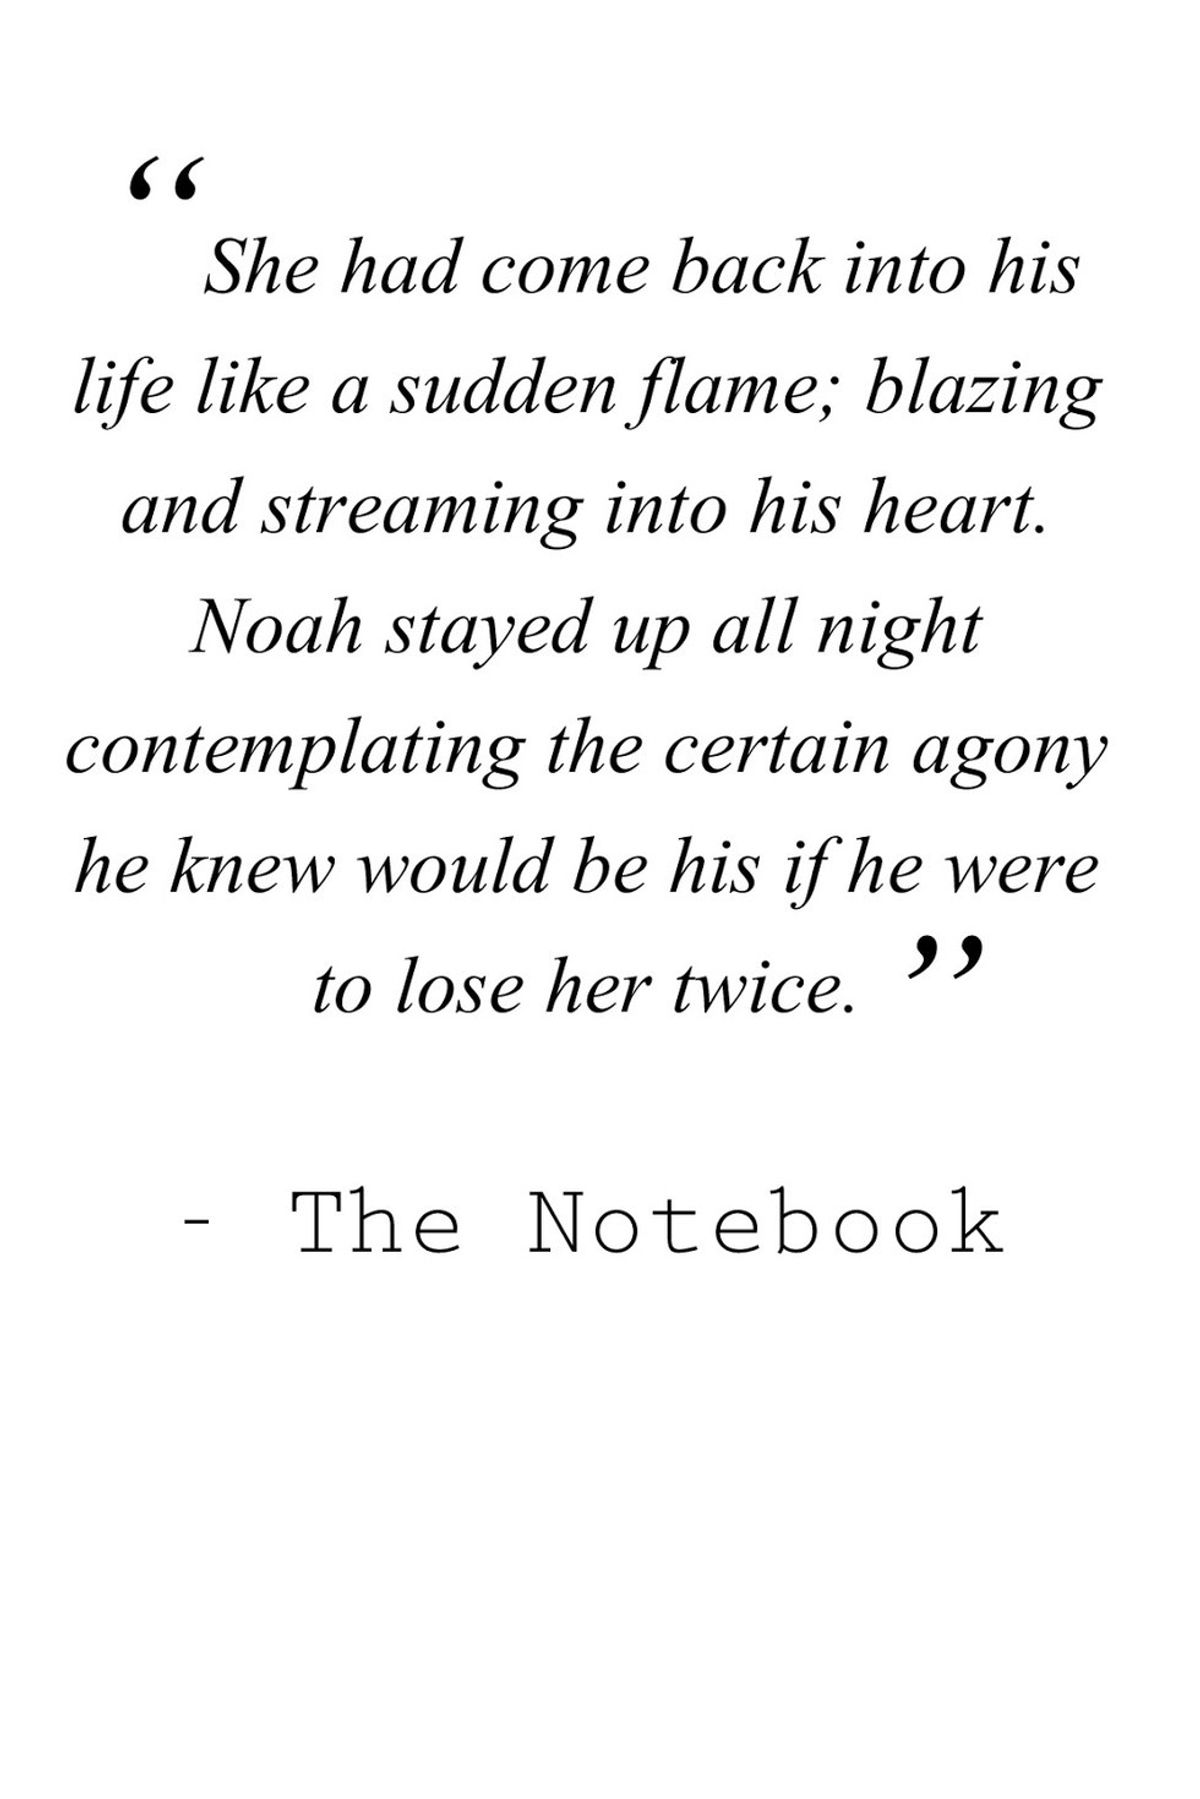 'The Notebook' quotes